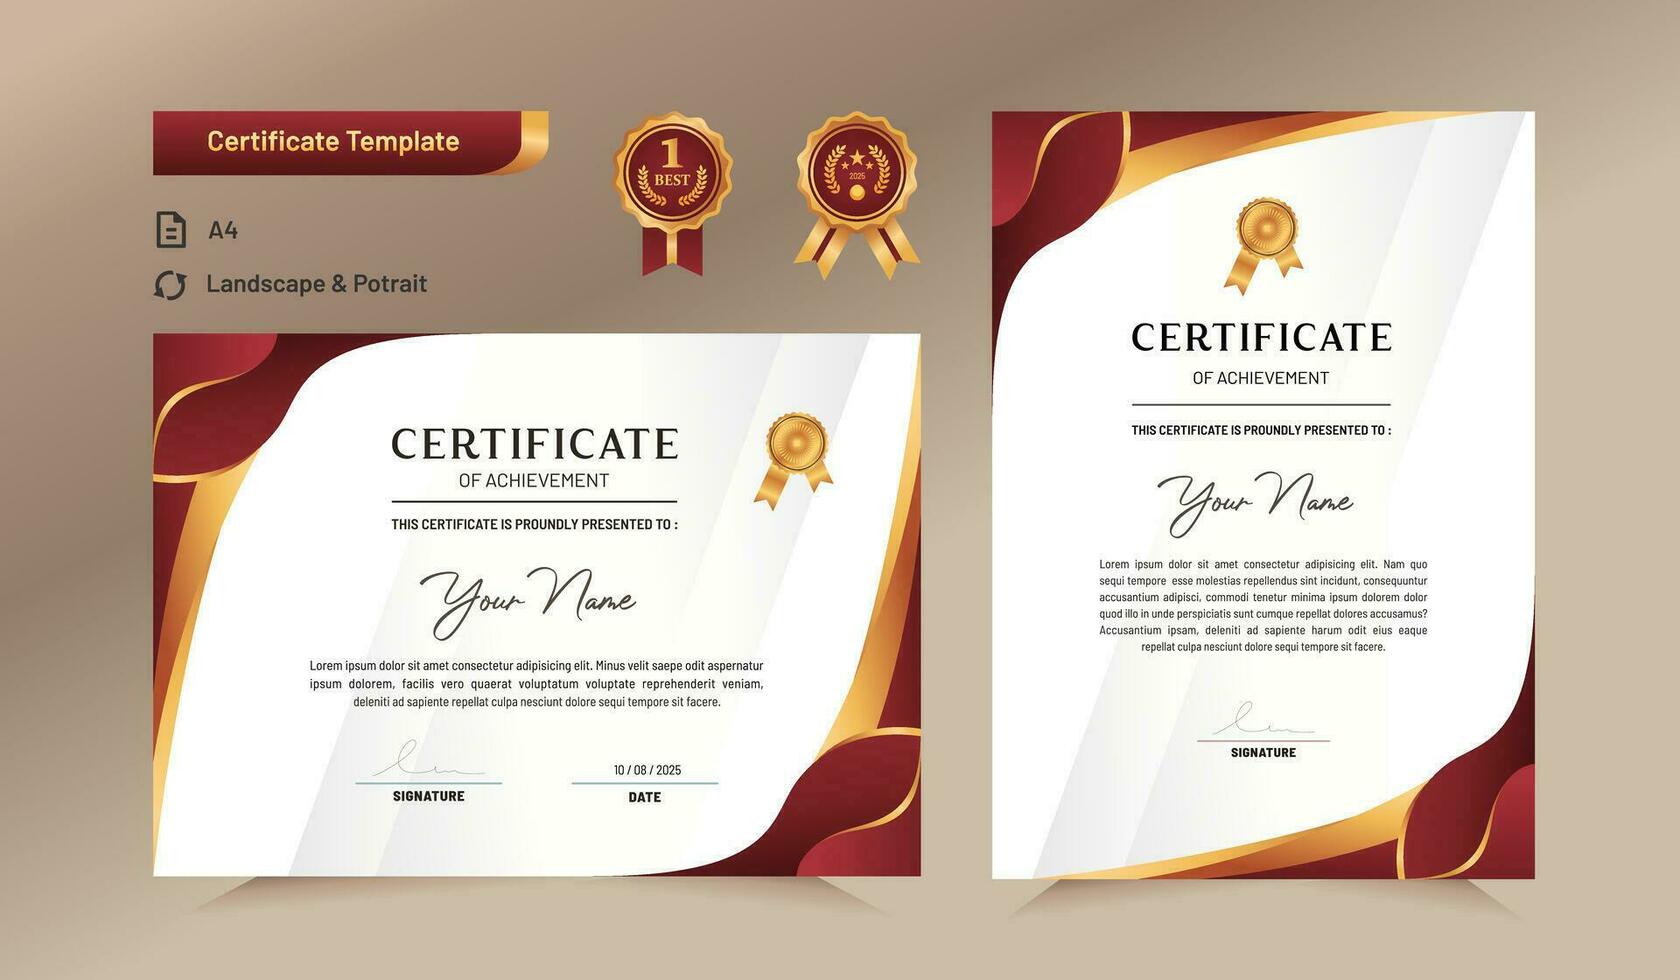 Red and gold certificate of achievement template. For award, business, and education needs. vector